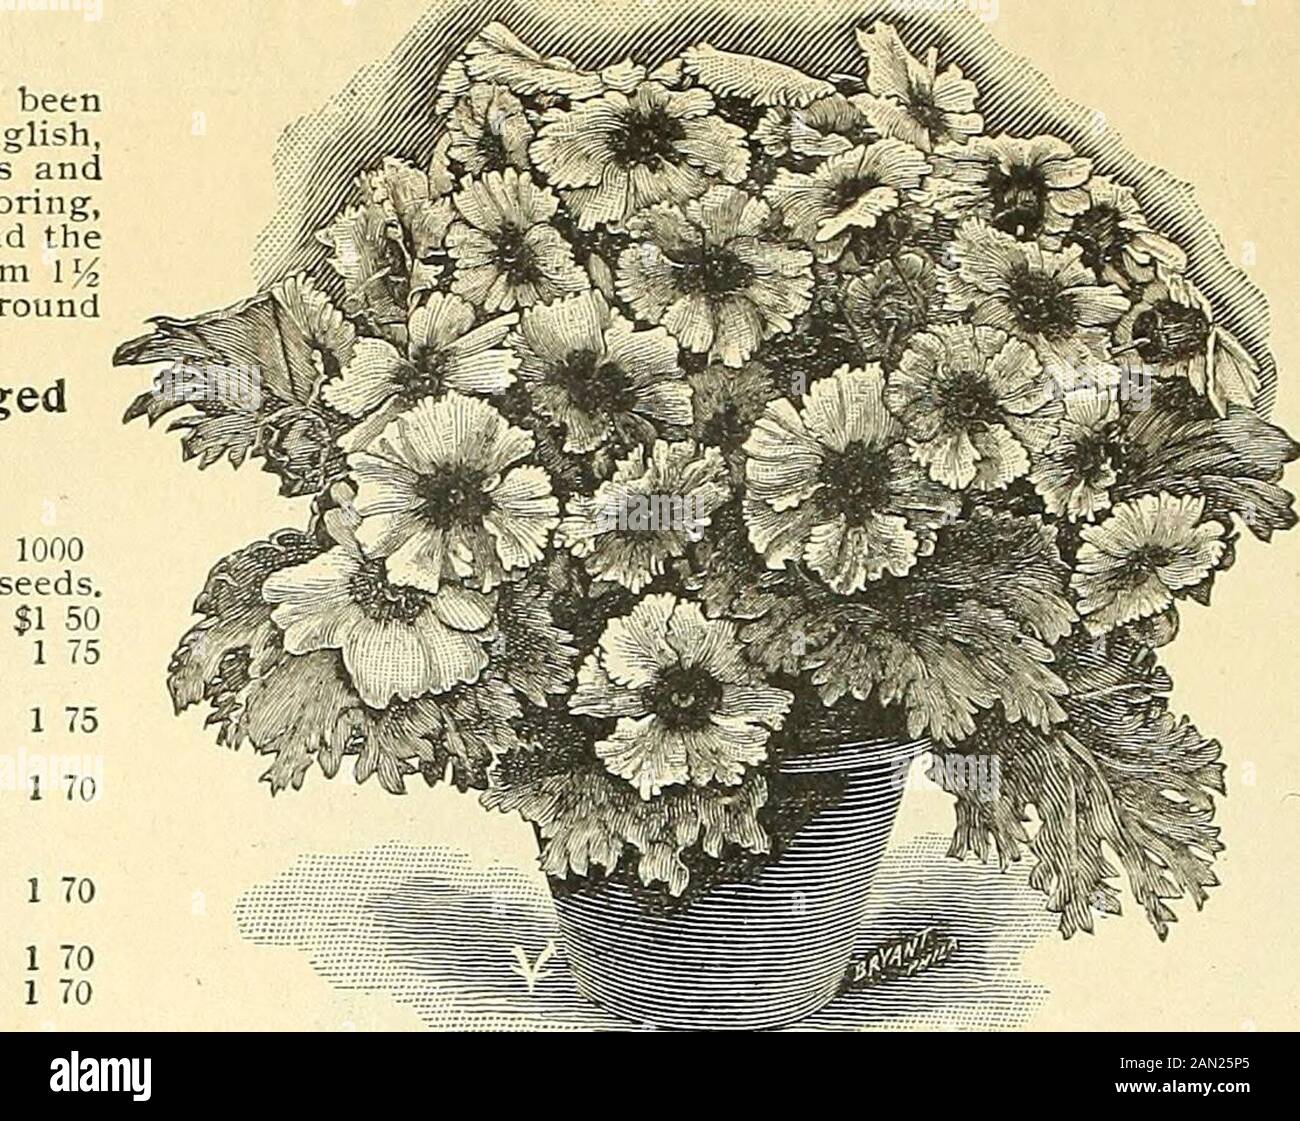 Vaughan's special import bulb prices for season 1904 . nd.and beautifully fringed. Chinese Primulas with FringedFoliage. Primula Sinensis Fimbriata. 250seeds. A1 t&gt;;l, pure white 50c. Chiswick Red, bright red.. 50c.Kermesina Splendens, crimson 50c. Atrosanguinea, brightest deep red 50c. .Alba Magrniflca, snowwhite, of excellent form andhabit 50c, Peachblossom, beautiful white with pink hue 50c. Blue, a clear sky blue 50c. Jiew Upriglit Deep Vel-vety Red 50c. Rosea, a bright pink 35c. Mont Blanc, new, large, pure milk-white flowers 50c. Striata, white and lilac striped 35c. IMtlMVI. V mixed, Stock Photo